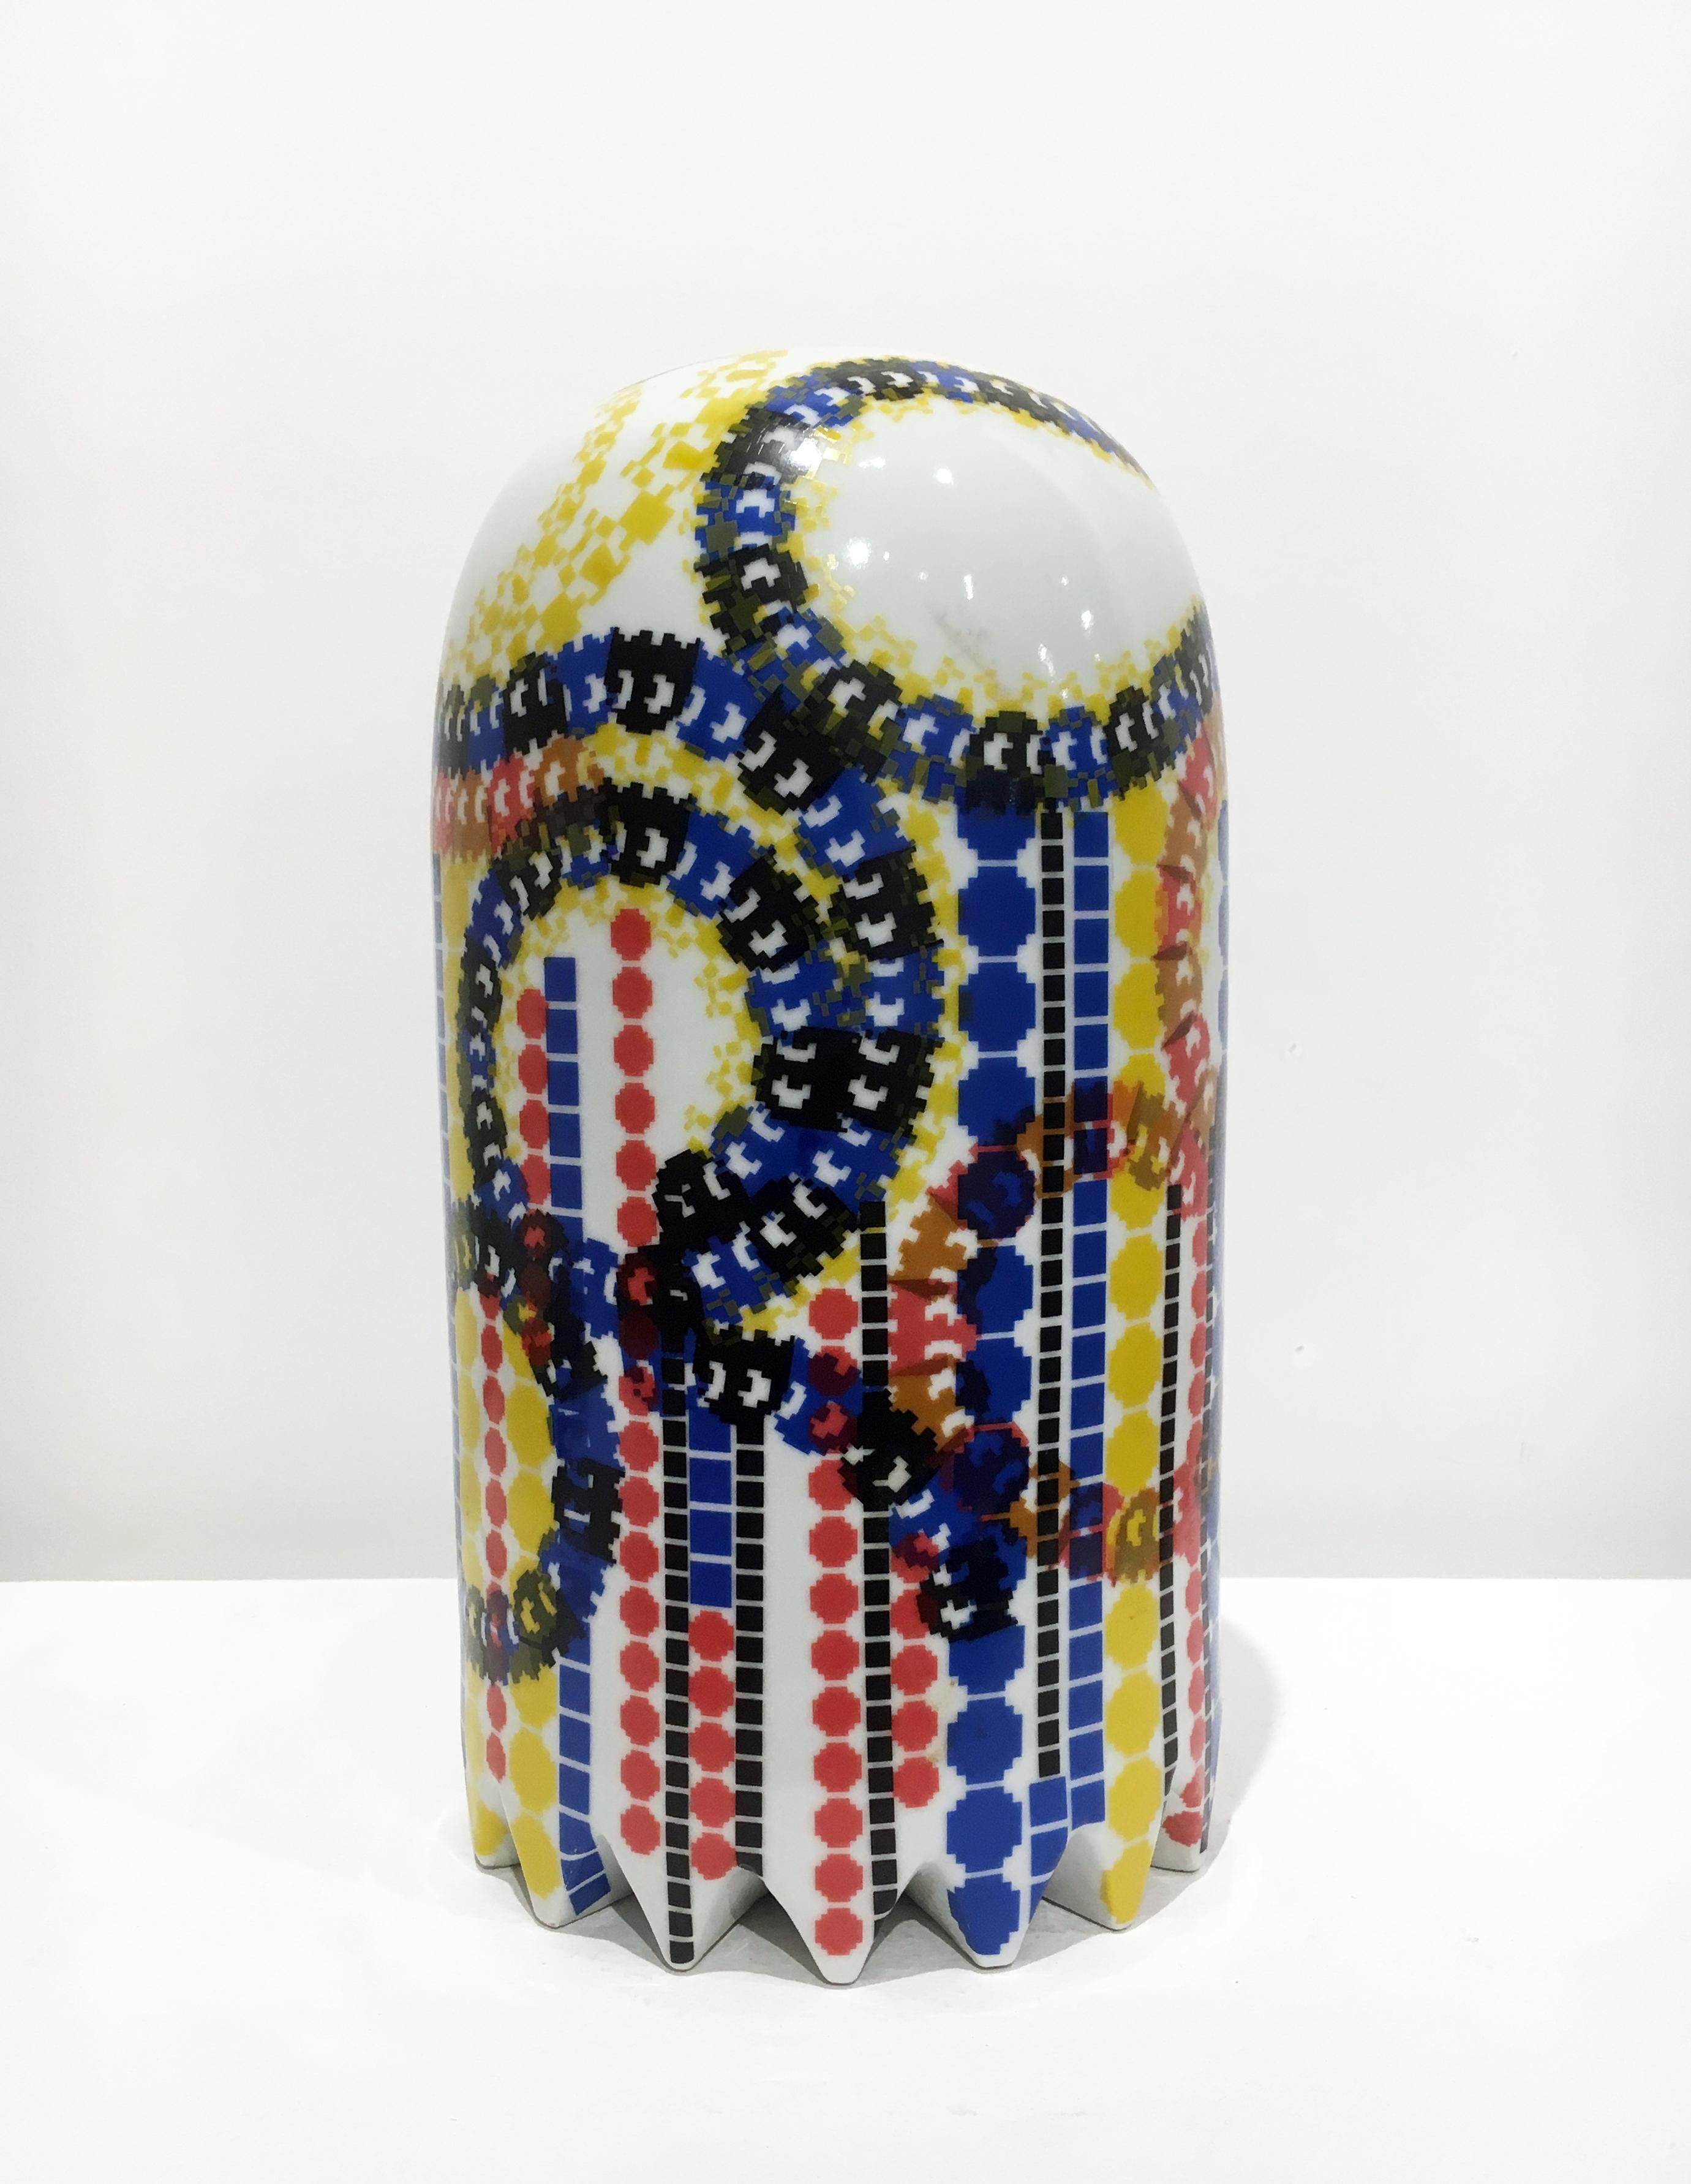 Medium Sized Contemporary Ceramic Sculpture with Colorful Decals, Porcelain 